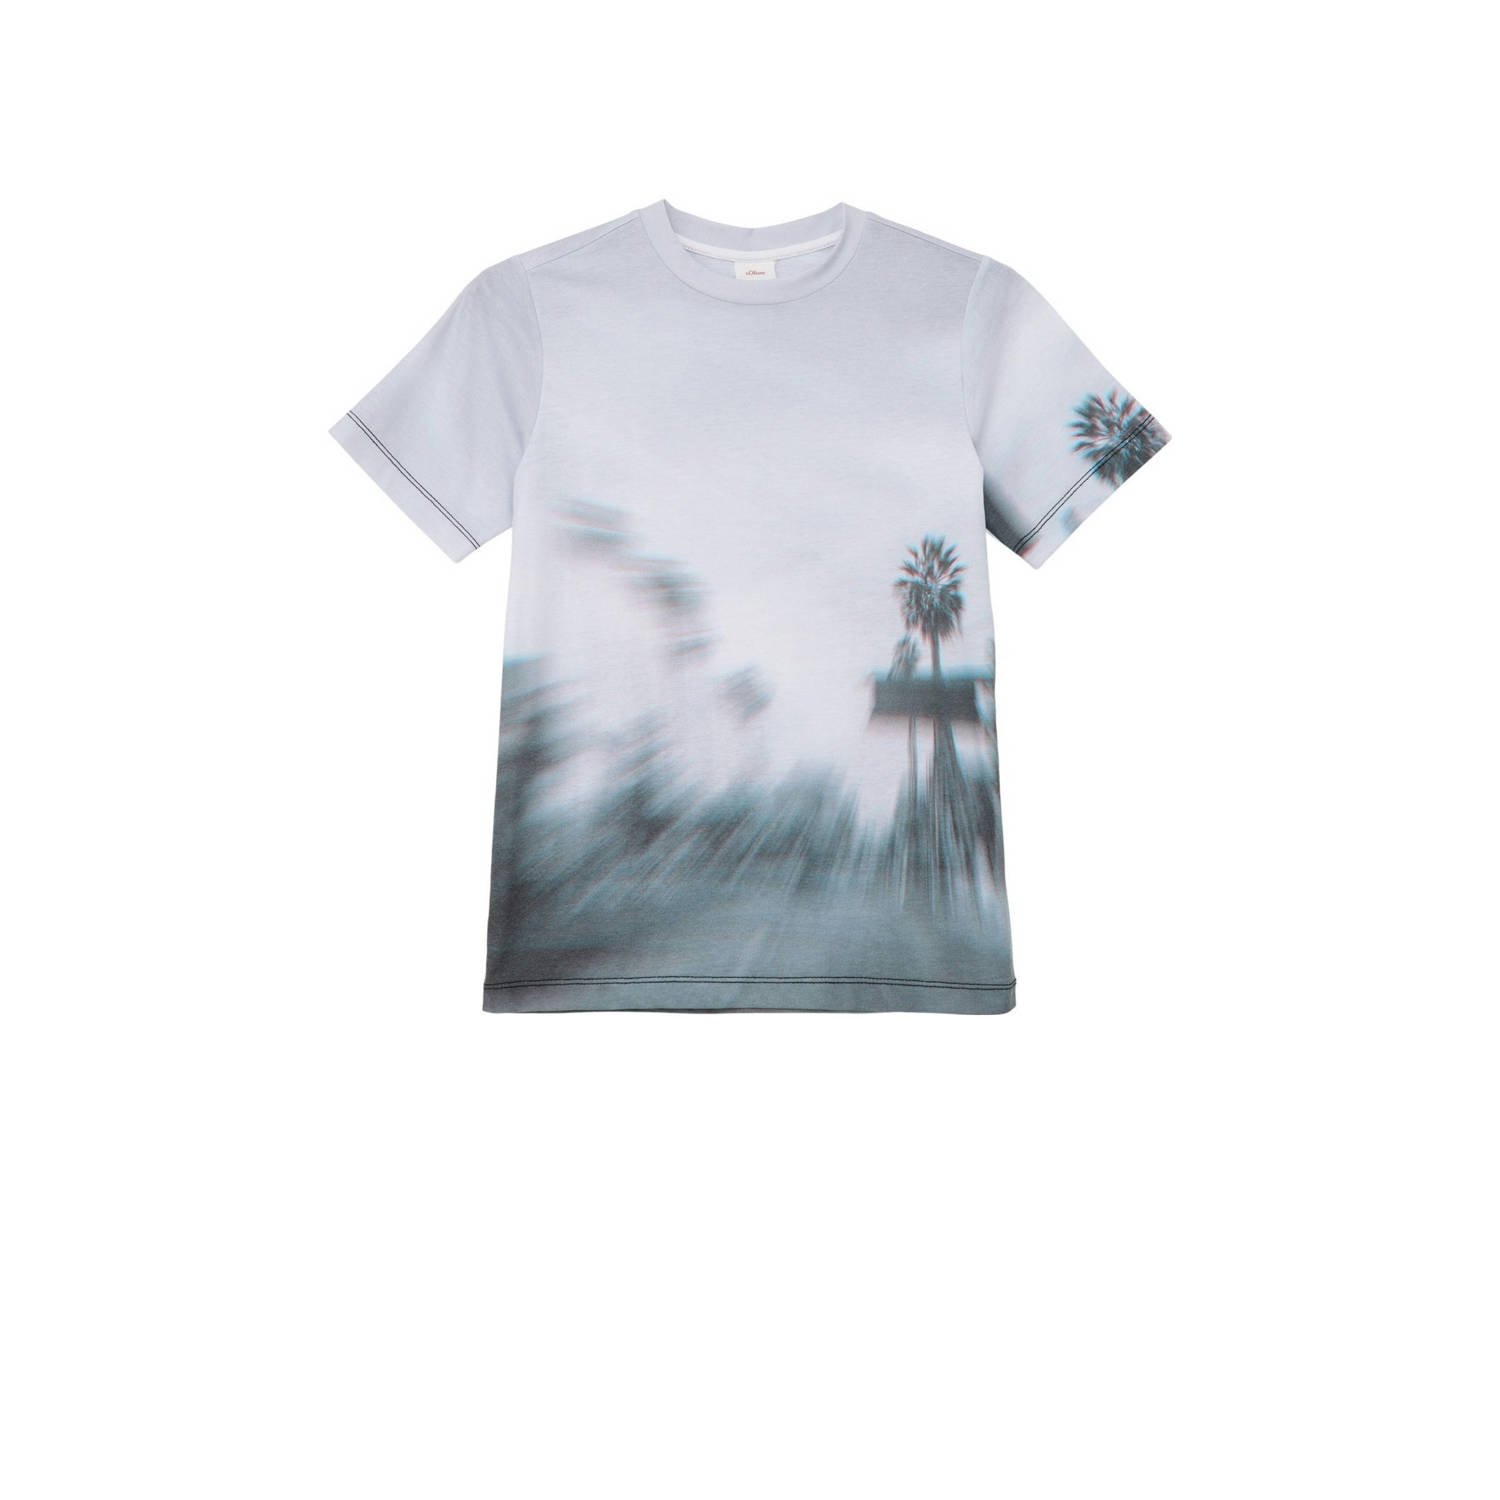 s.Oliver T-shirt met all over print wit